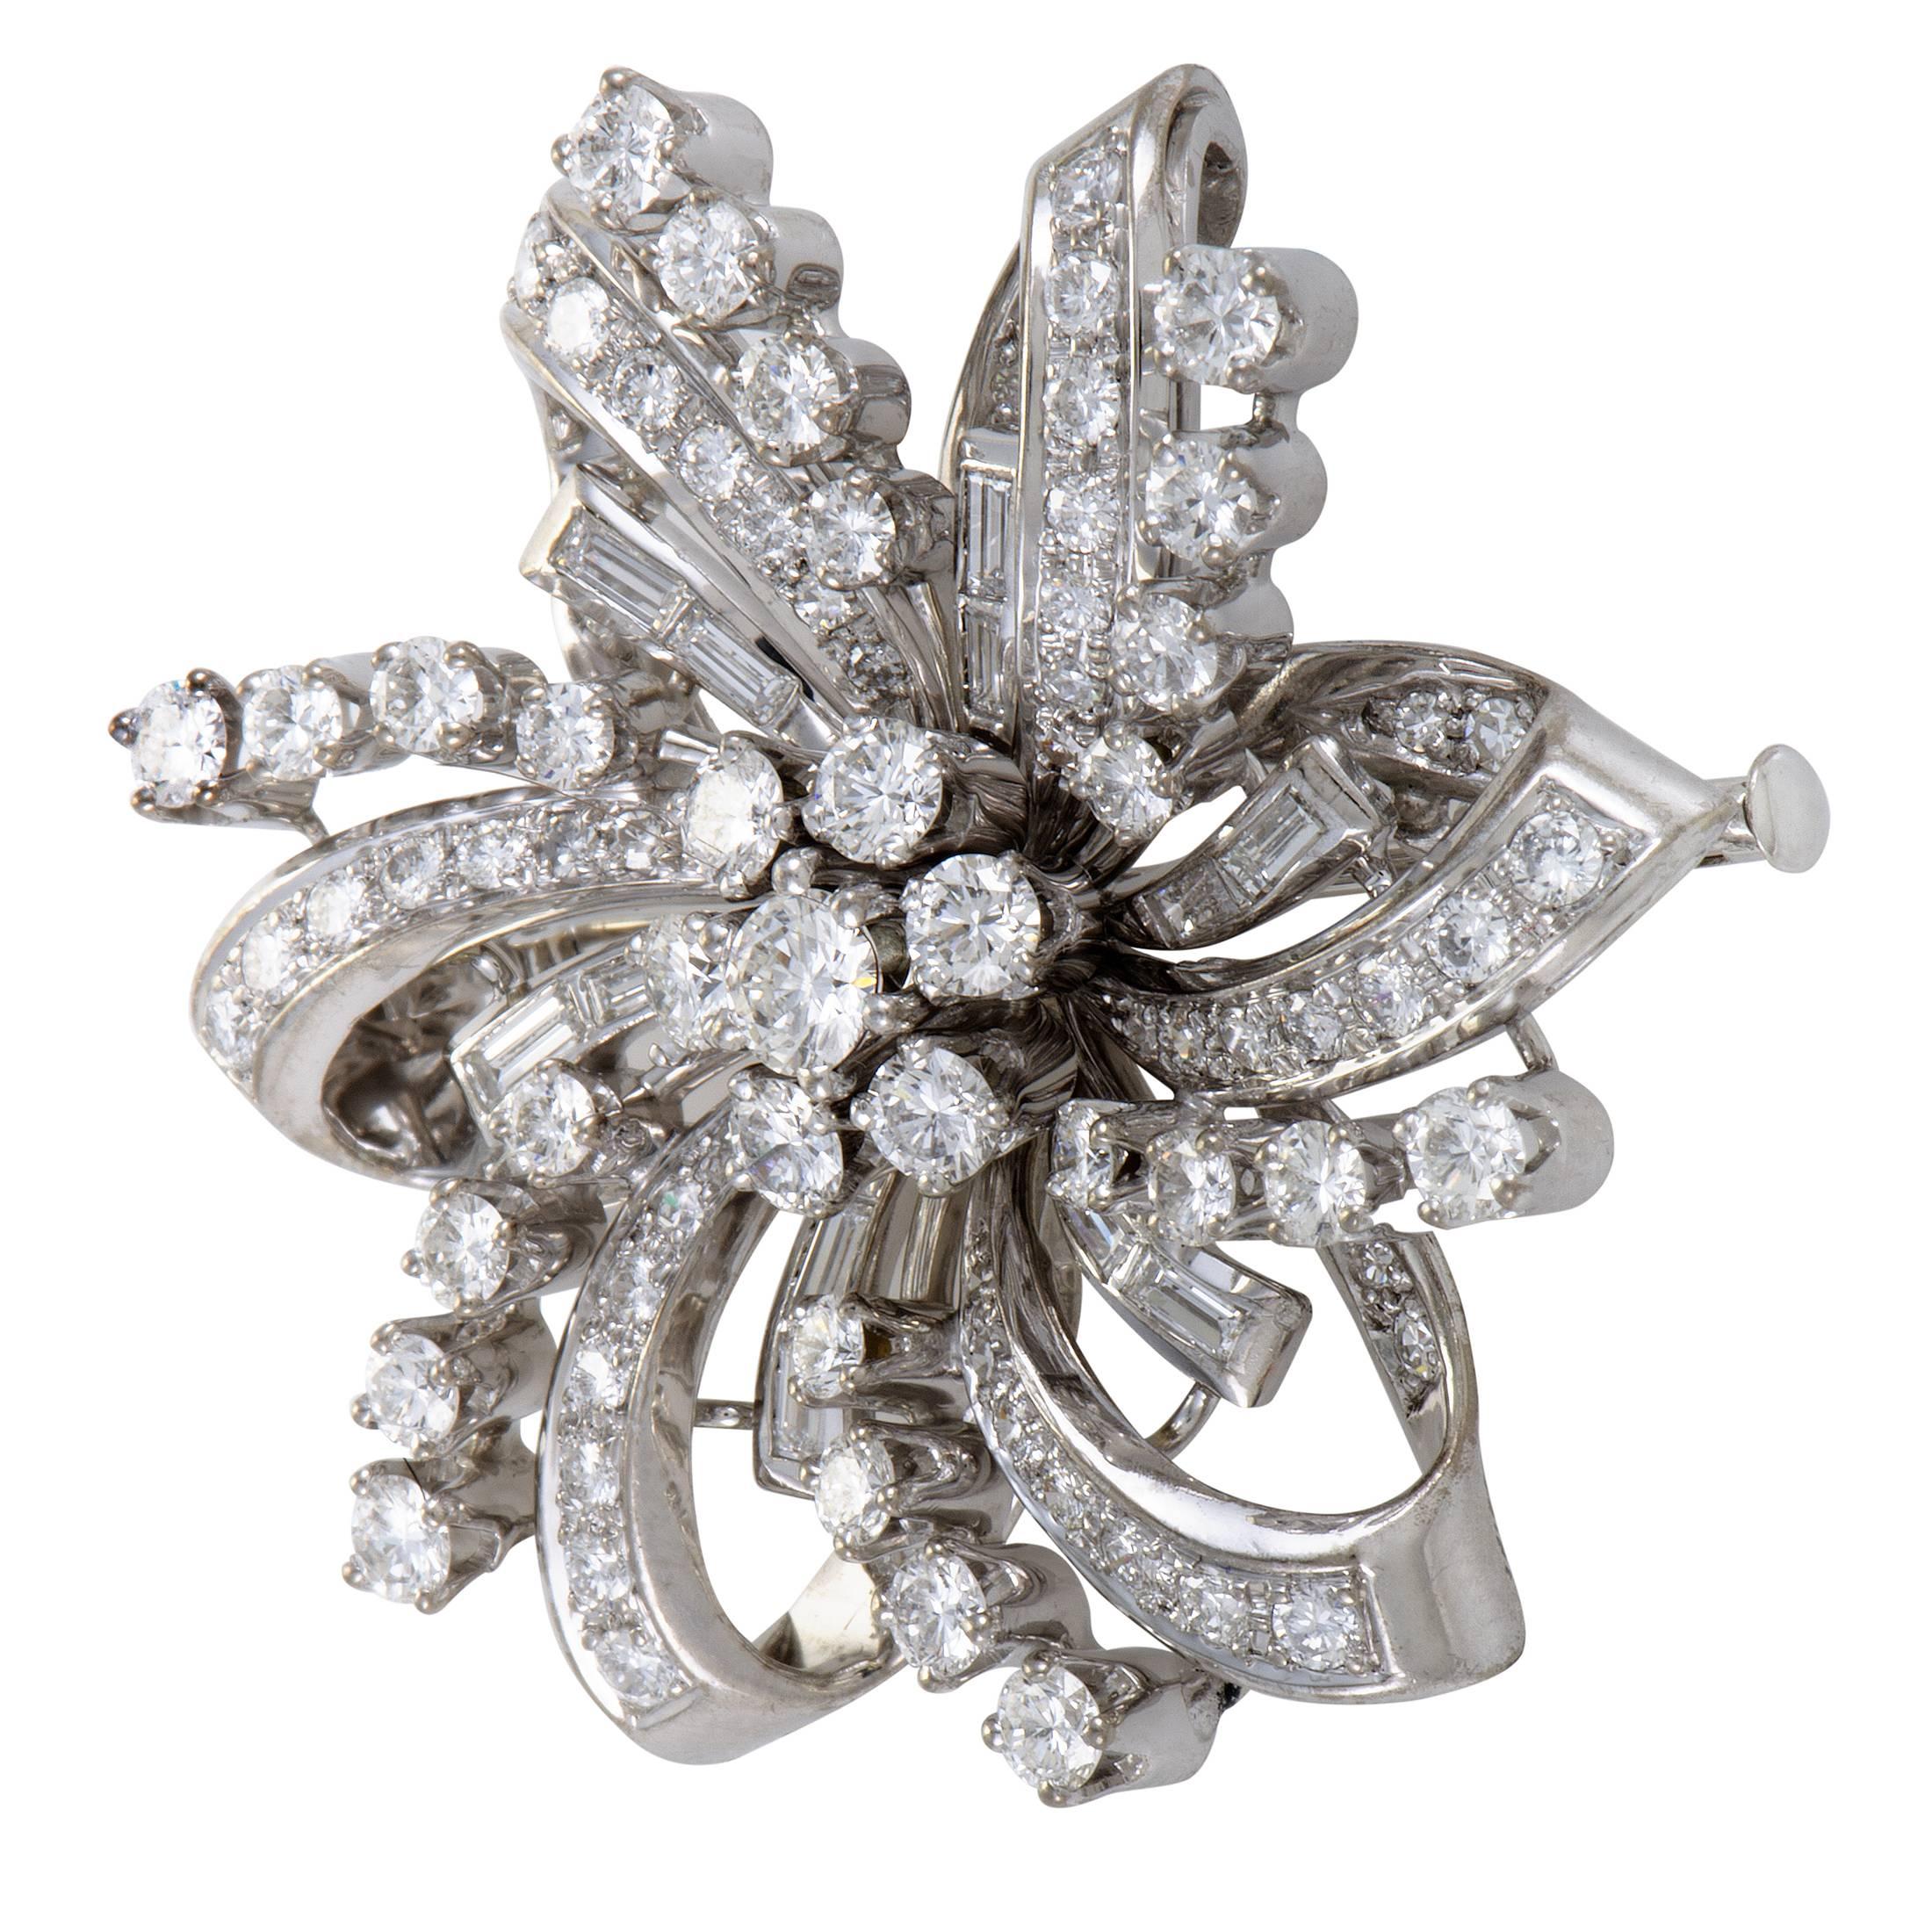 Designed in a wonderfully harmonious and lavish manner, this astonishing brooch is crafted with exquisite expertise to brilliantly depict a majestic flower in gleaming 18K white gold and resplendent diamonds amounting approximately to 4.10 carats.